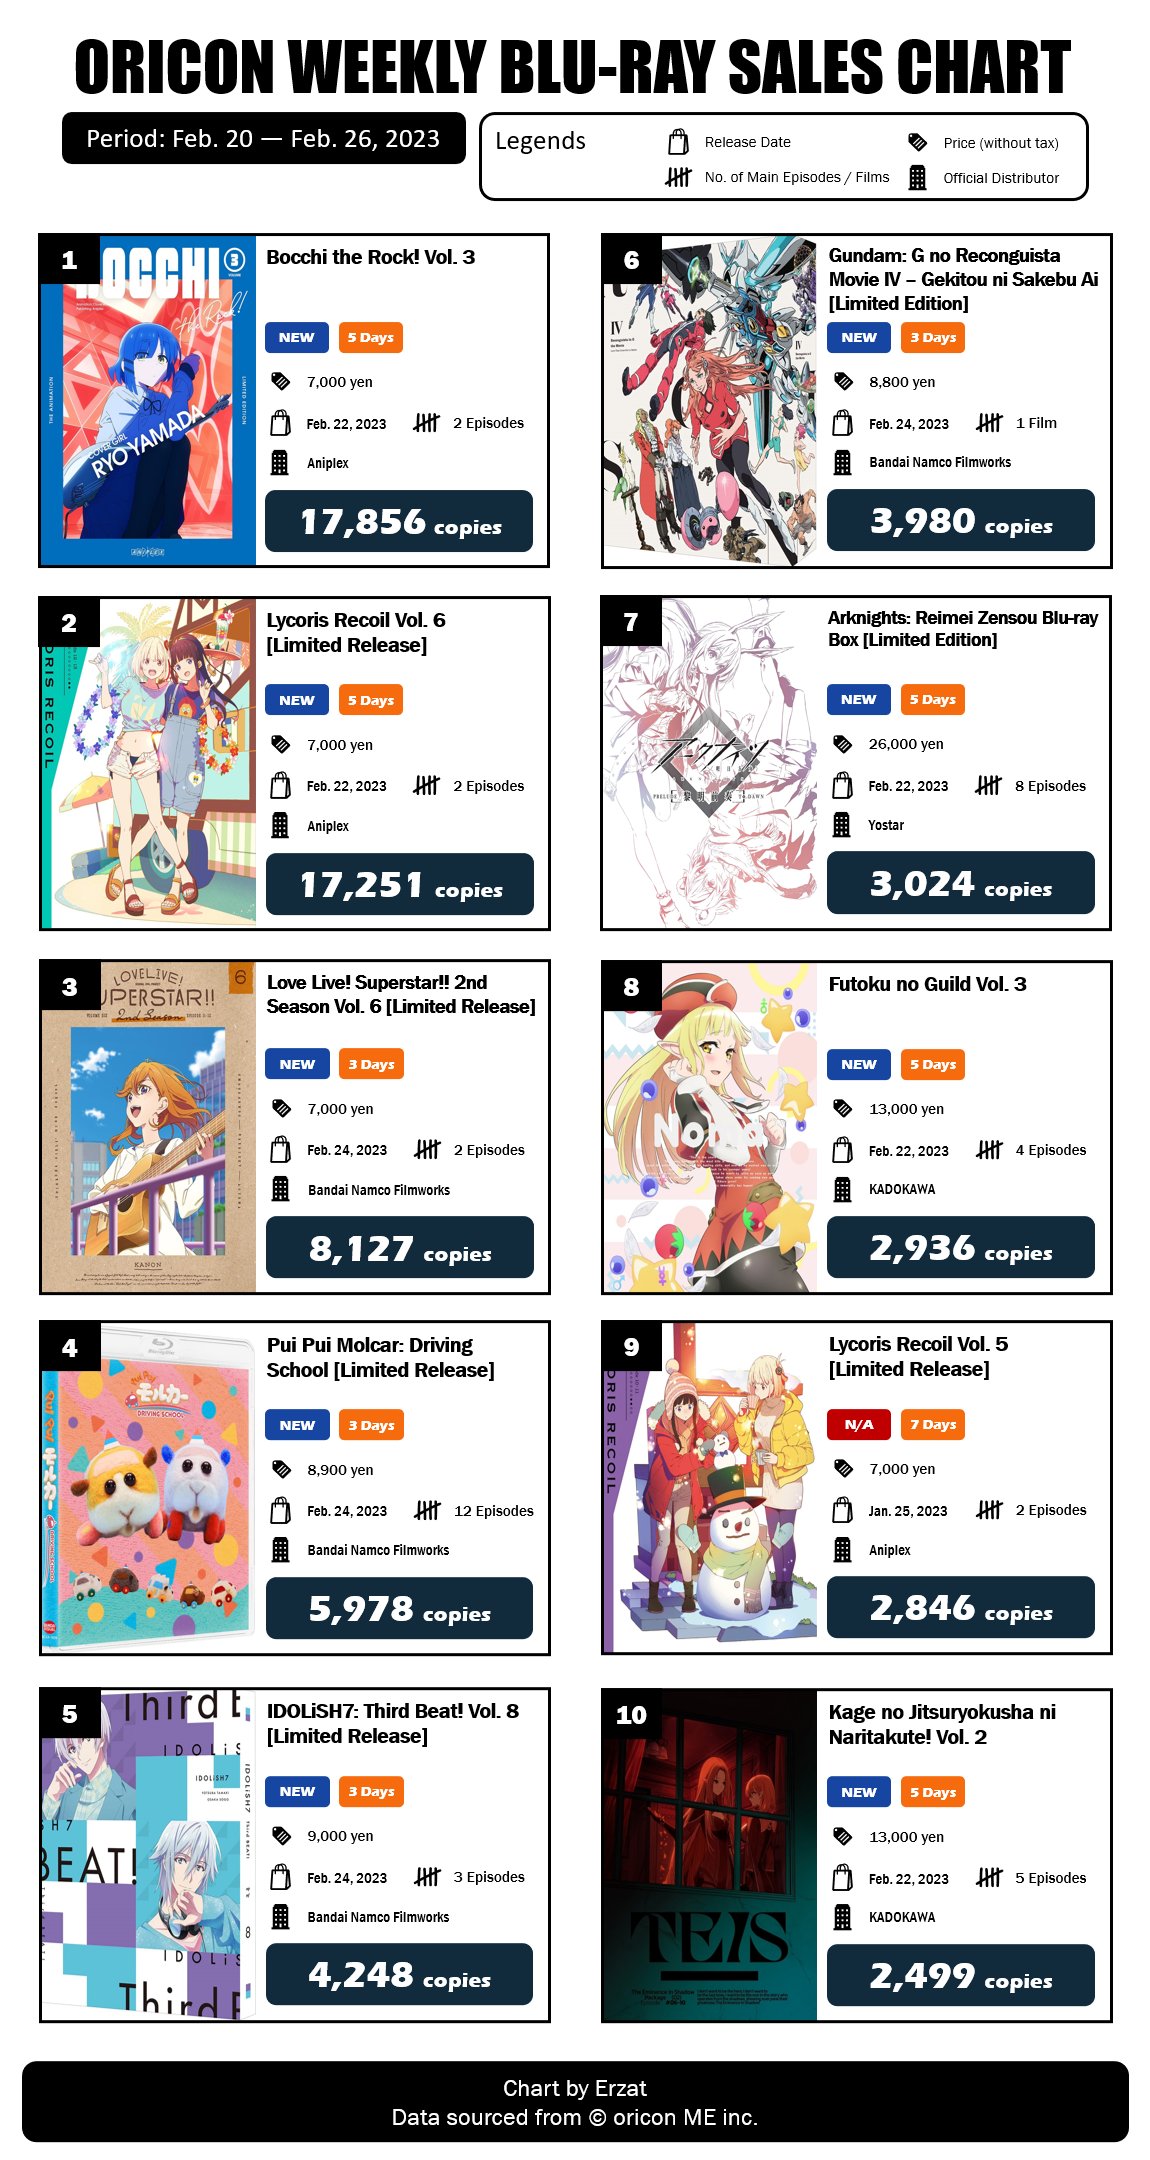 Japan Top 10 Weekly Anime Blu-ray and DVD Sales Ranking: April